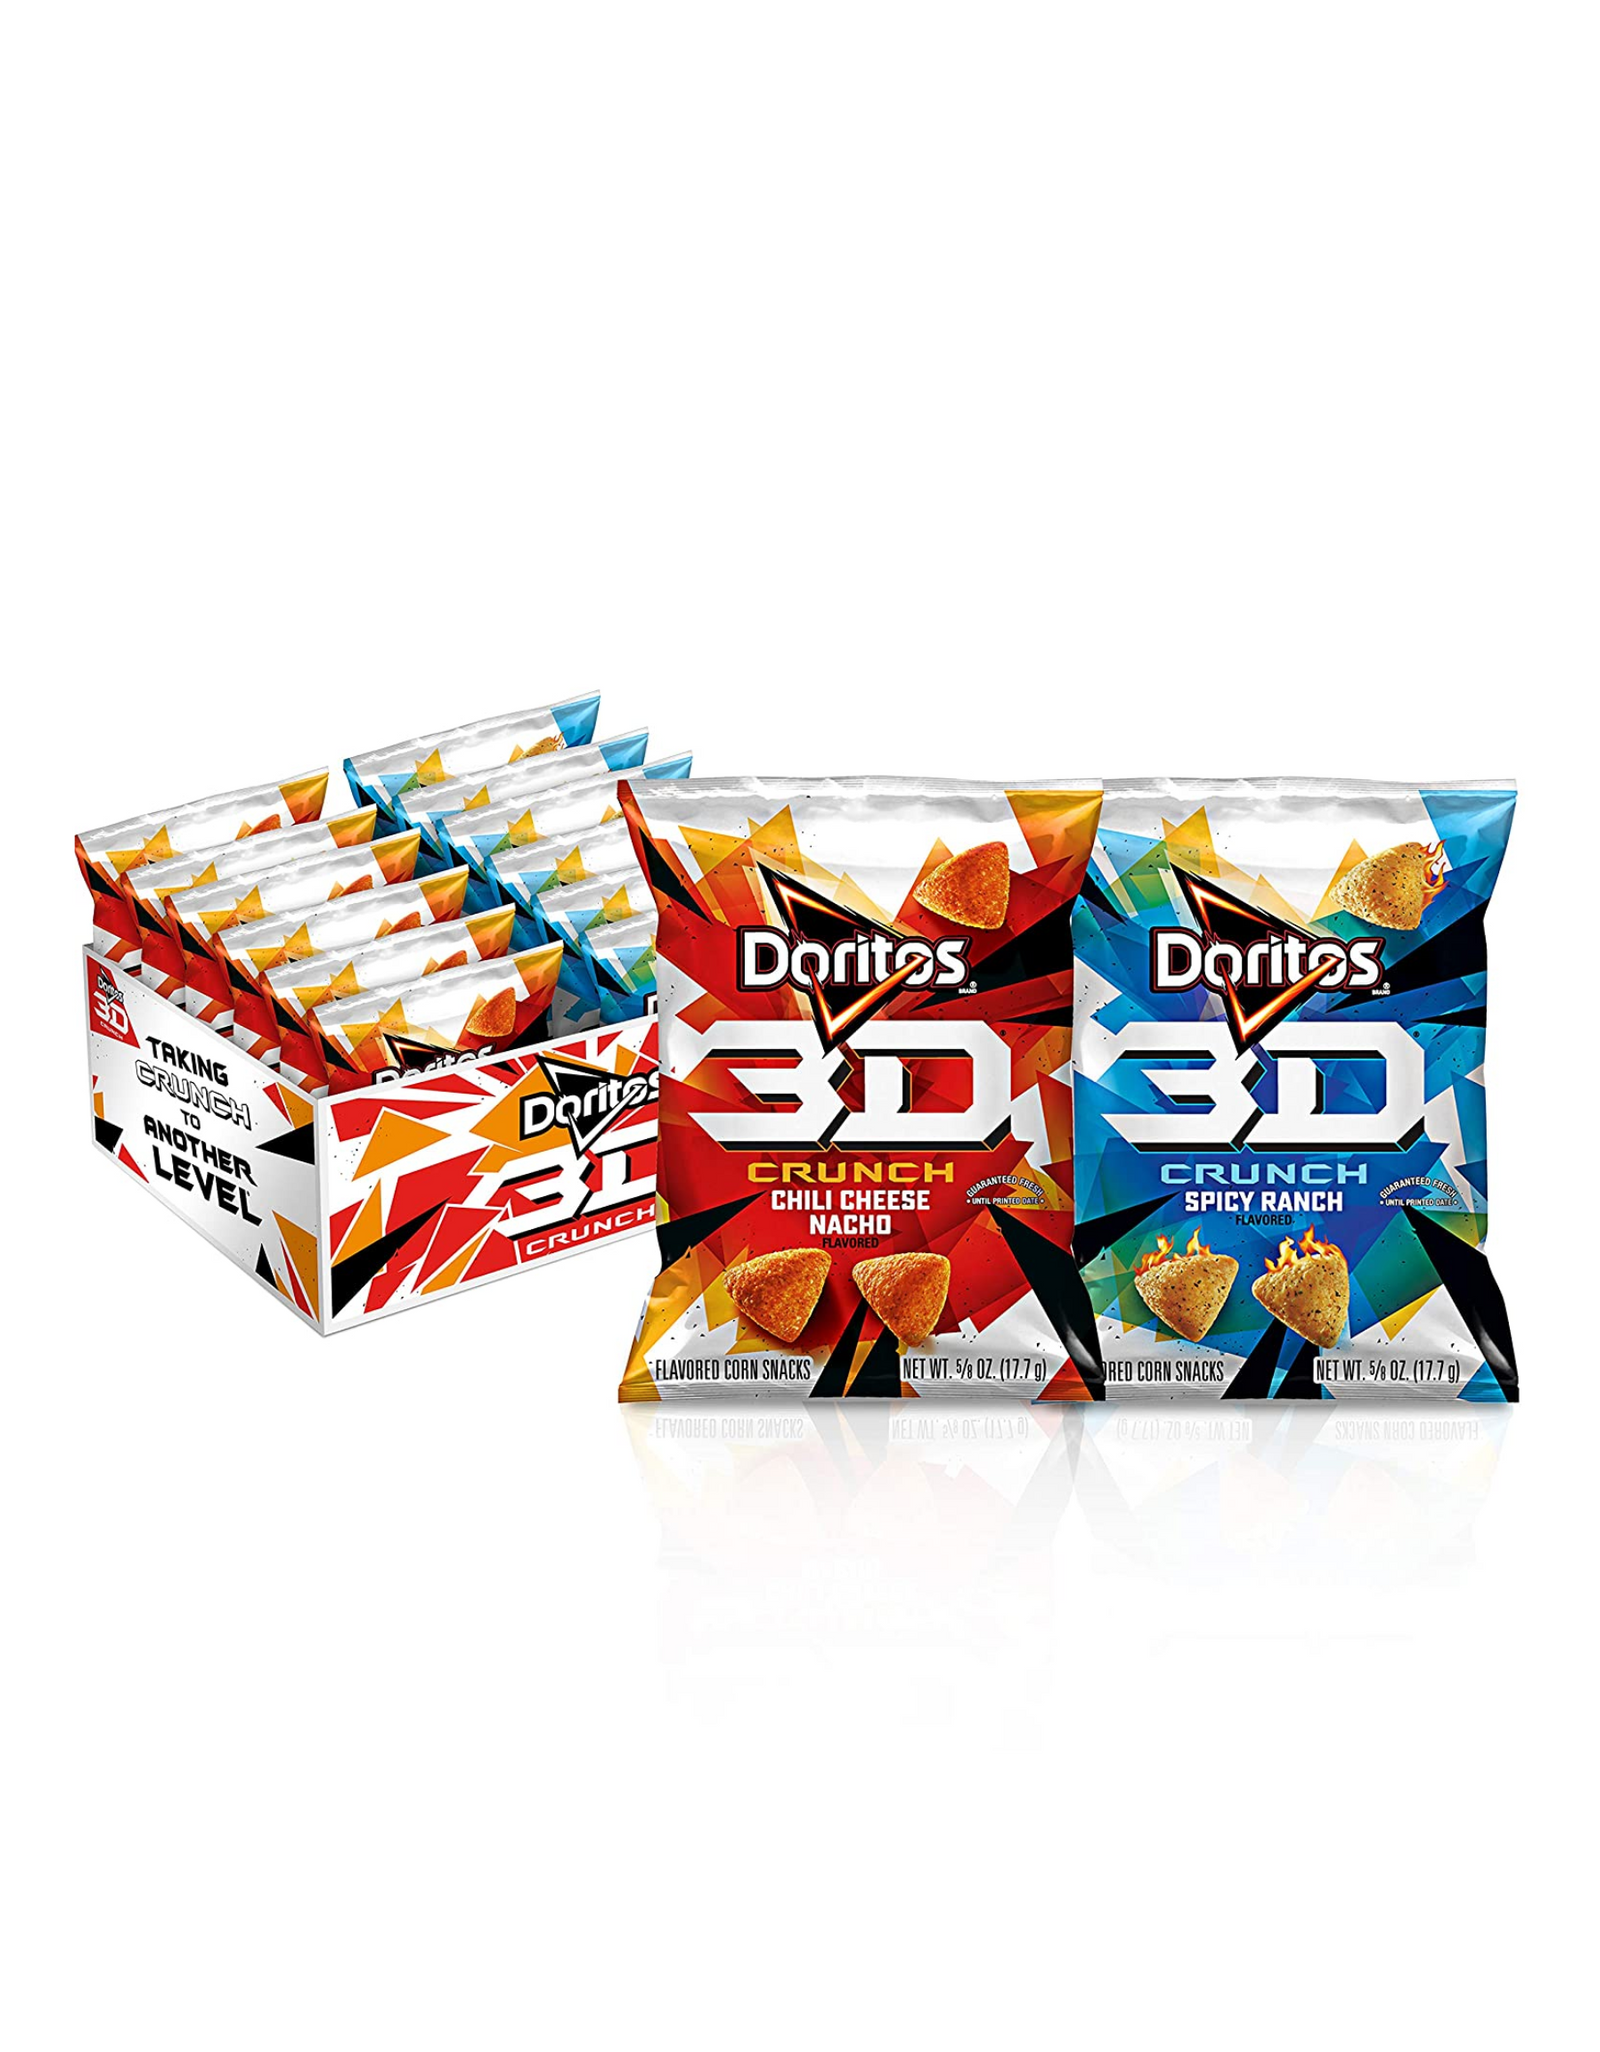 Doritos 3D Crunch Flavored Corn Snack, 2 Flavor Variety Pack, 0.625 oz, 36 Ct (Pack of 1)